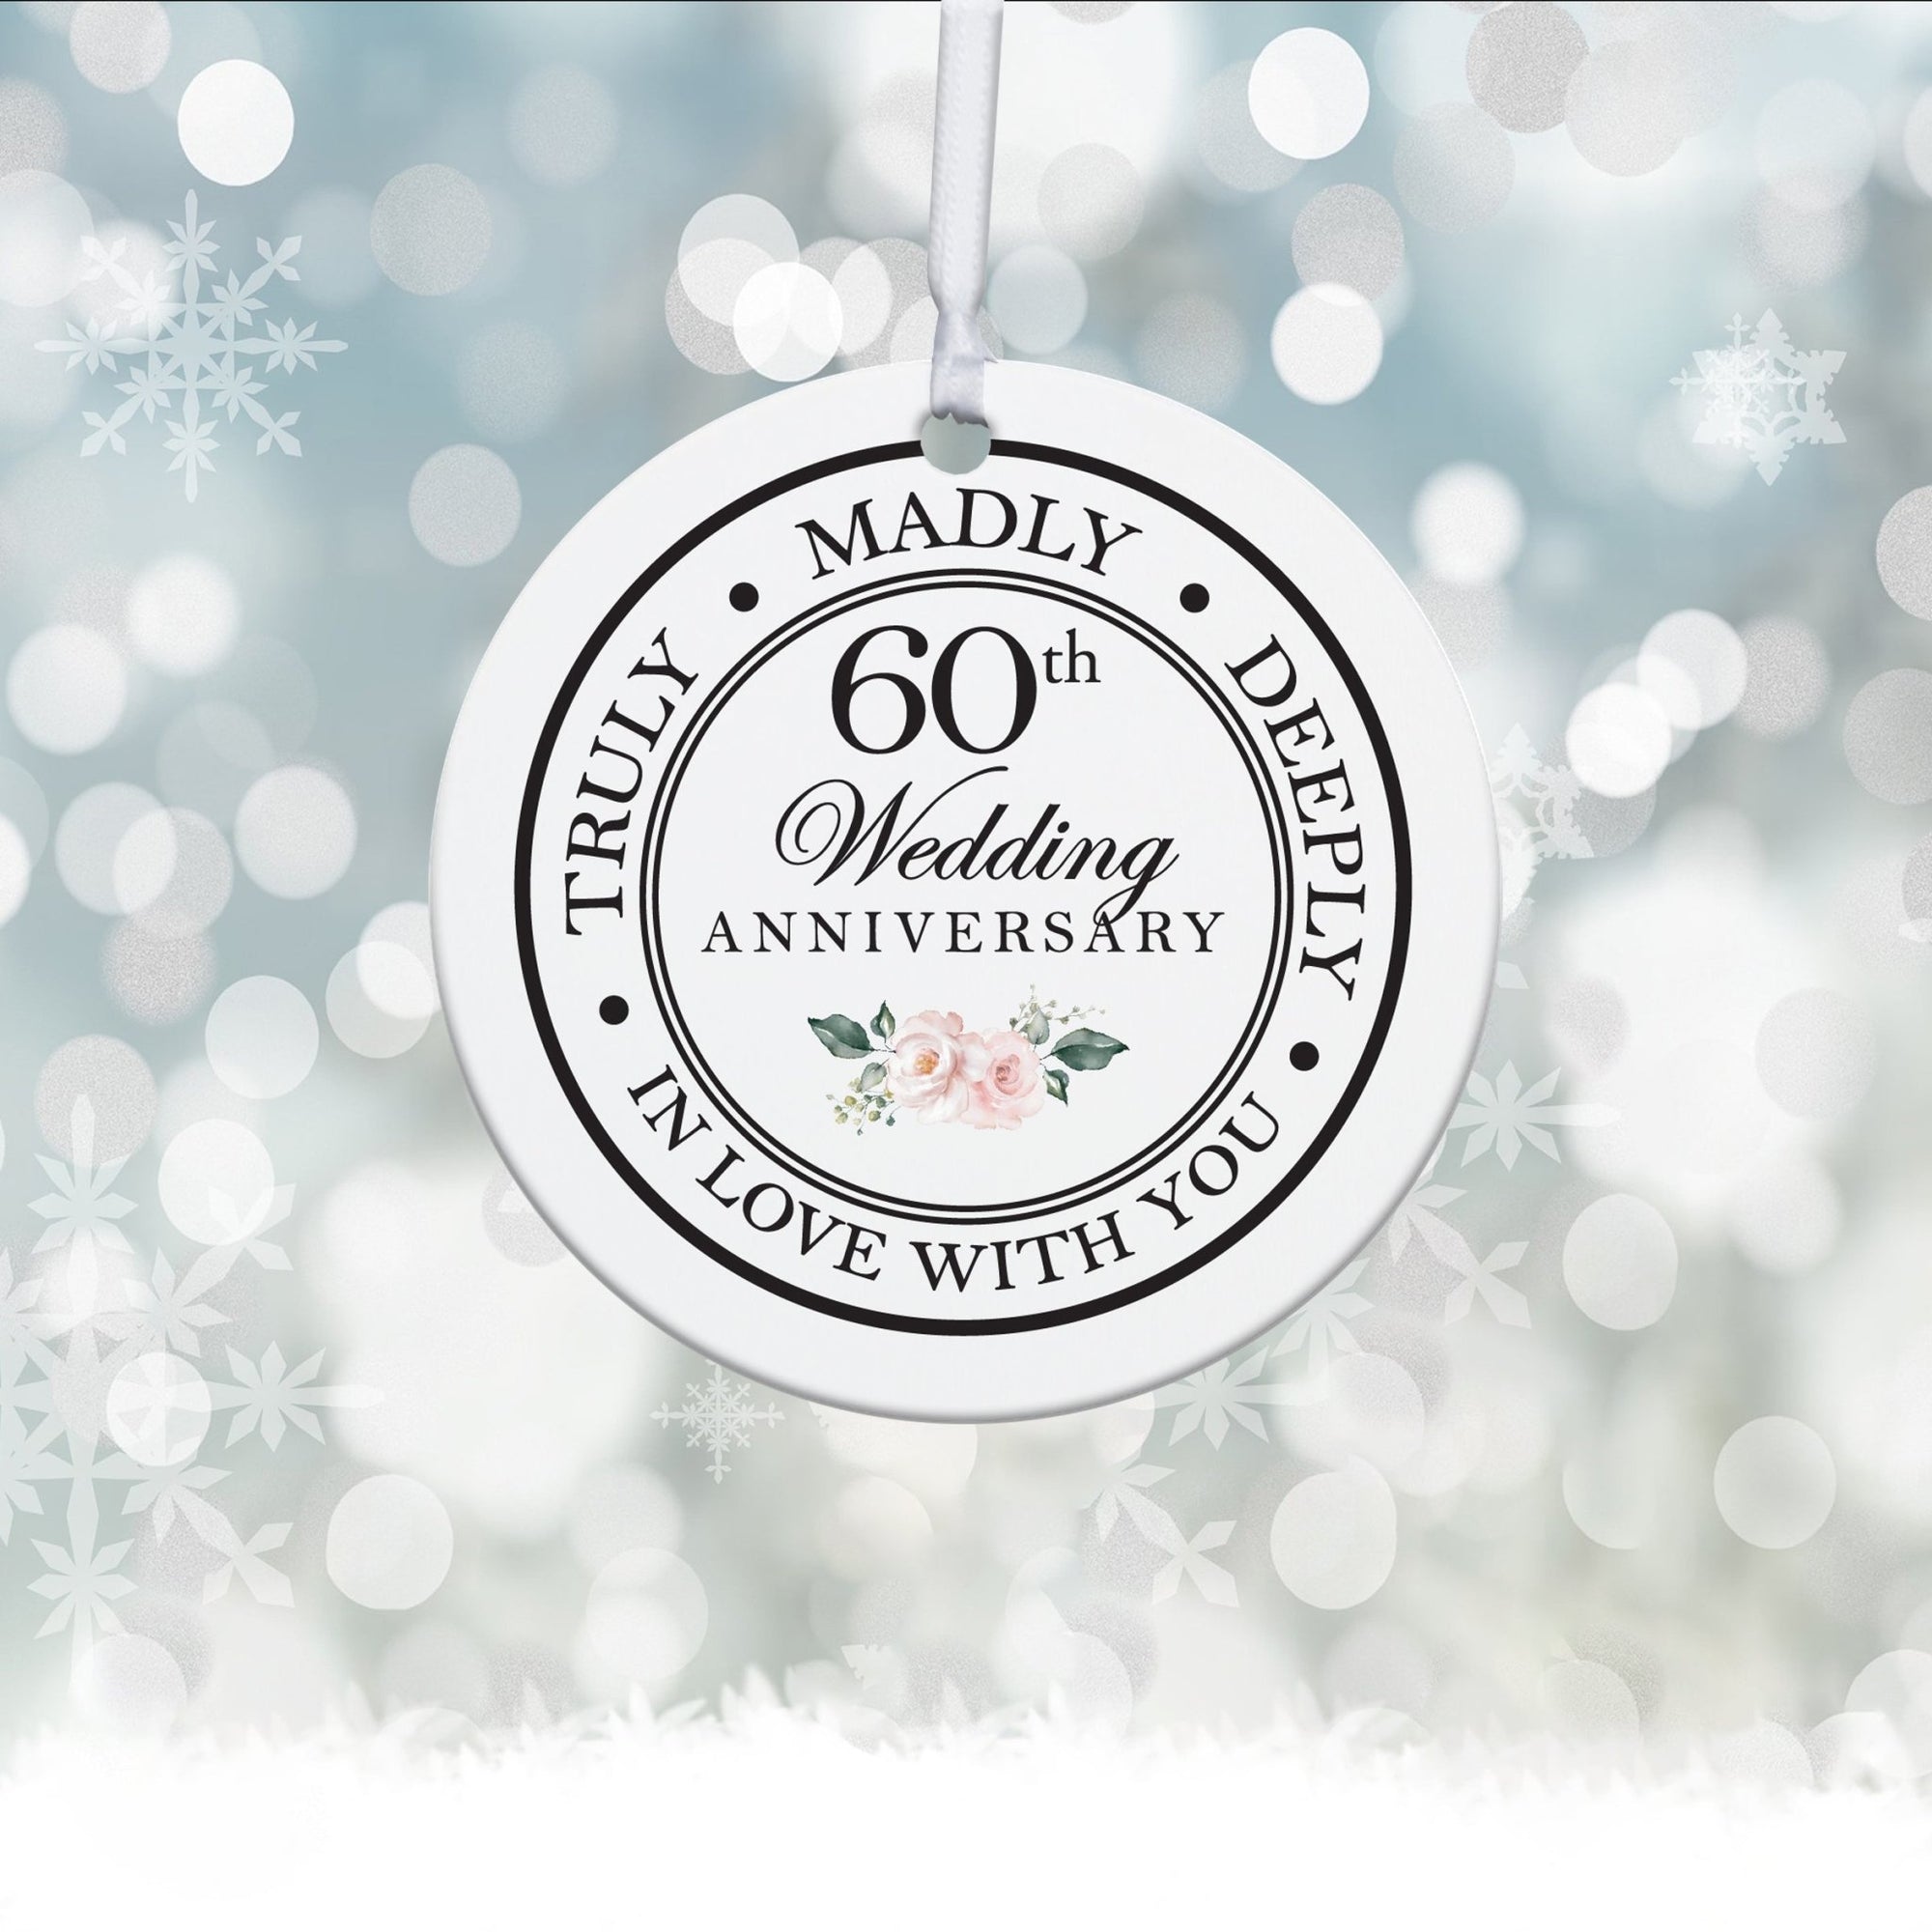 60th Wedding Anniversary White Ornament With Inspirational Message Gift Ideas - Truly, Madly, Deeply In Love With You - LifeSong Milestones